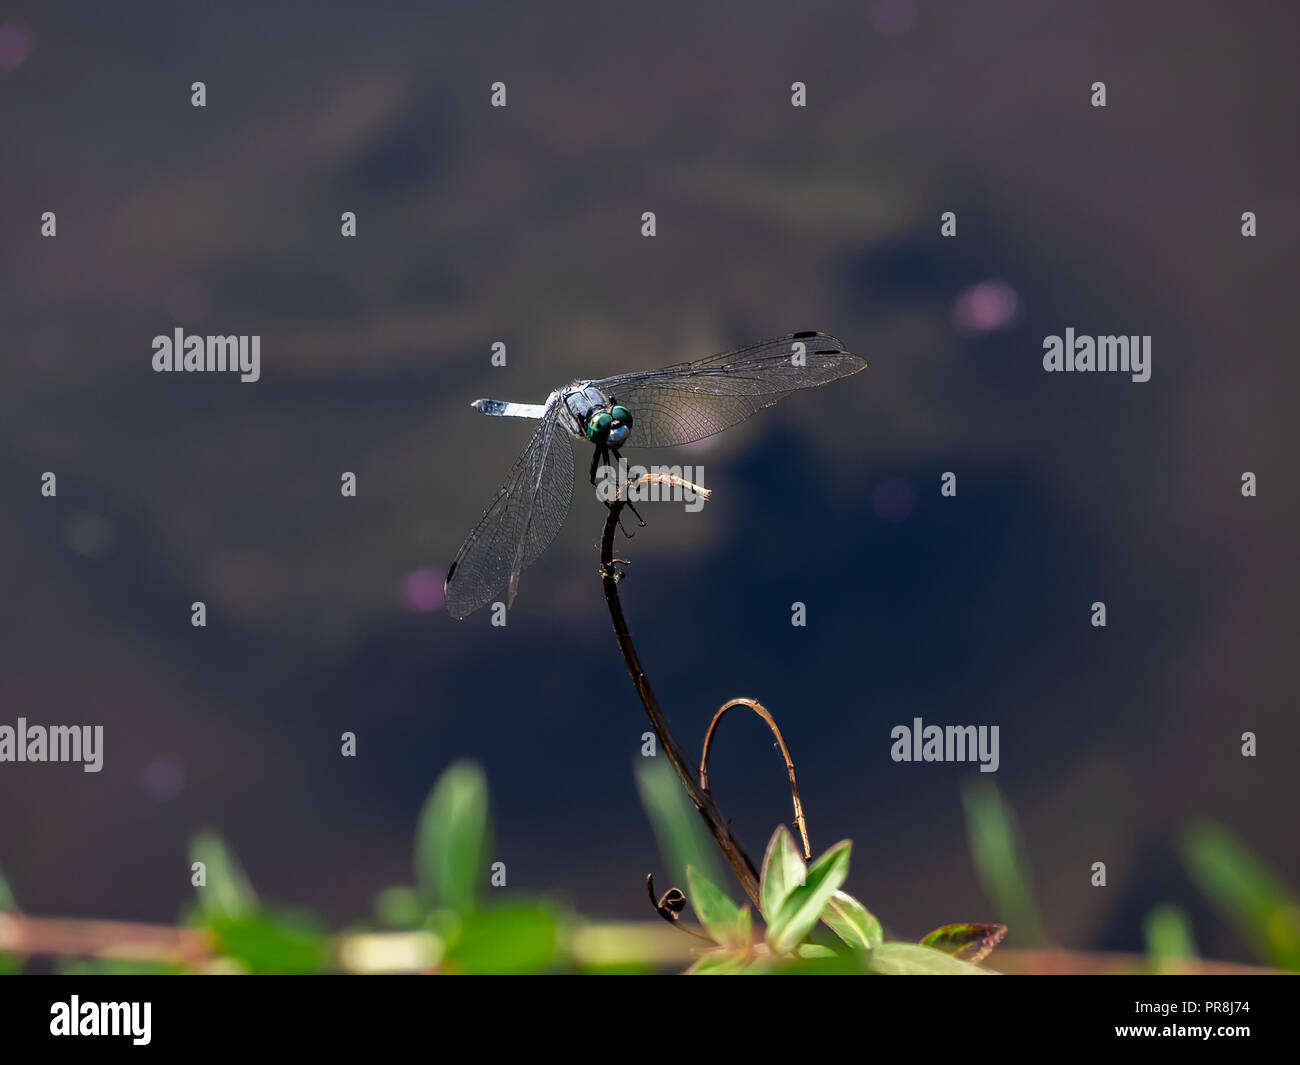 A blue Japanese dragonfly rests on a small twig beside a pond in Japan Stock Photo